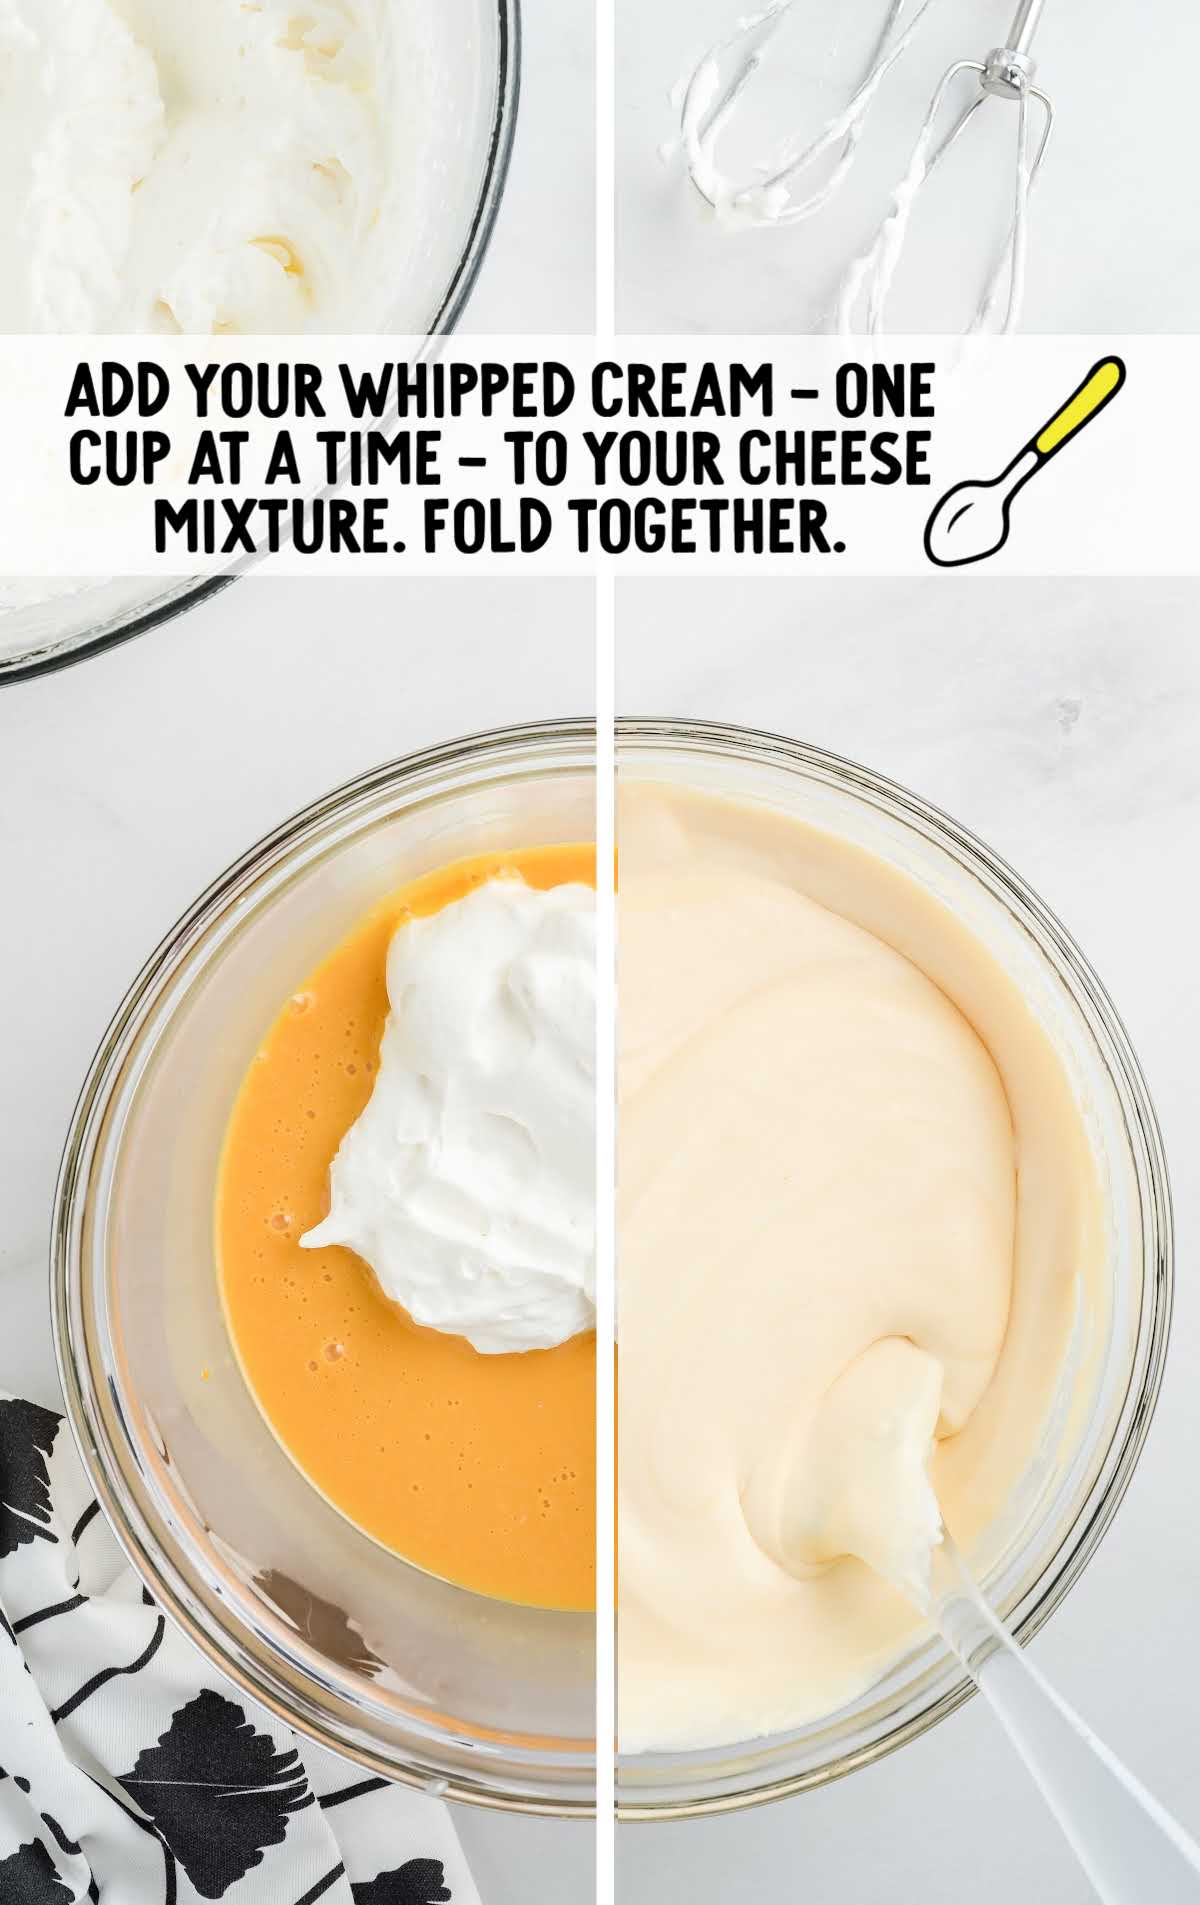 whipped cream added to the cheese mixture and fold together